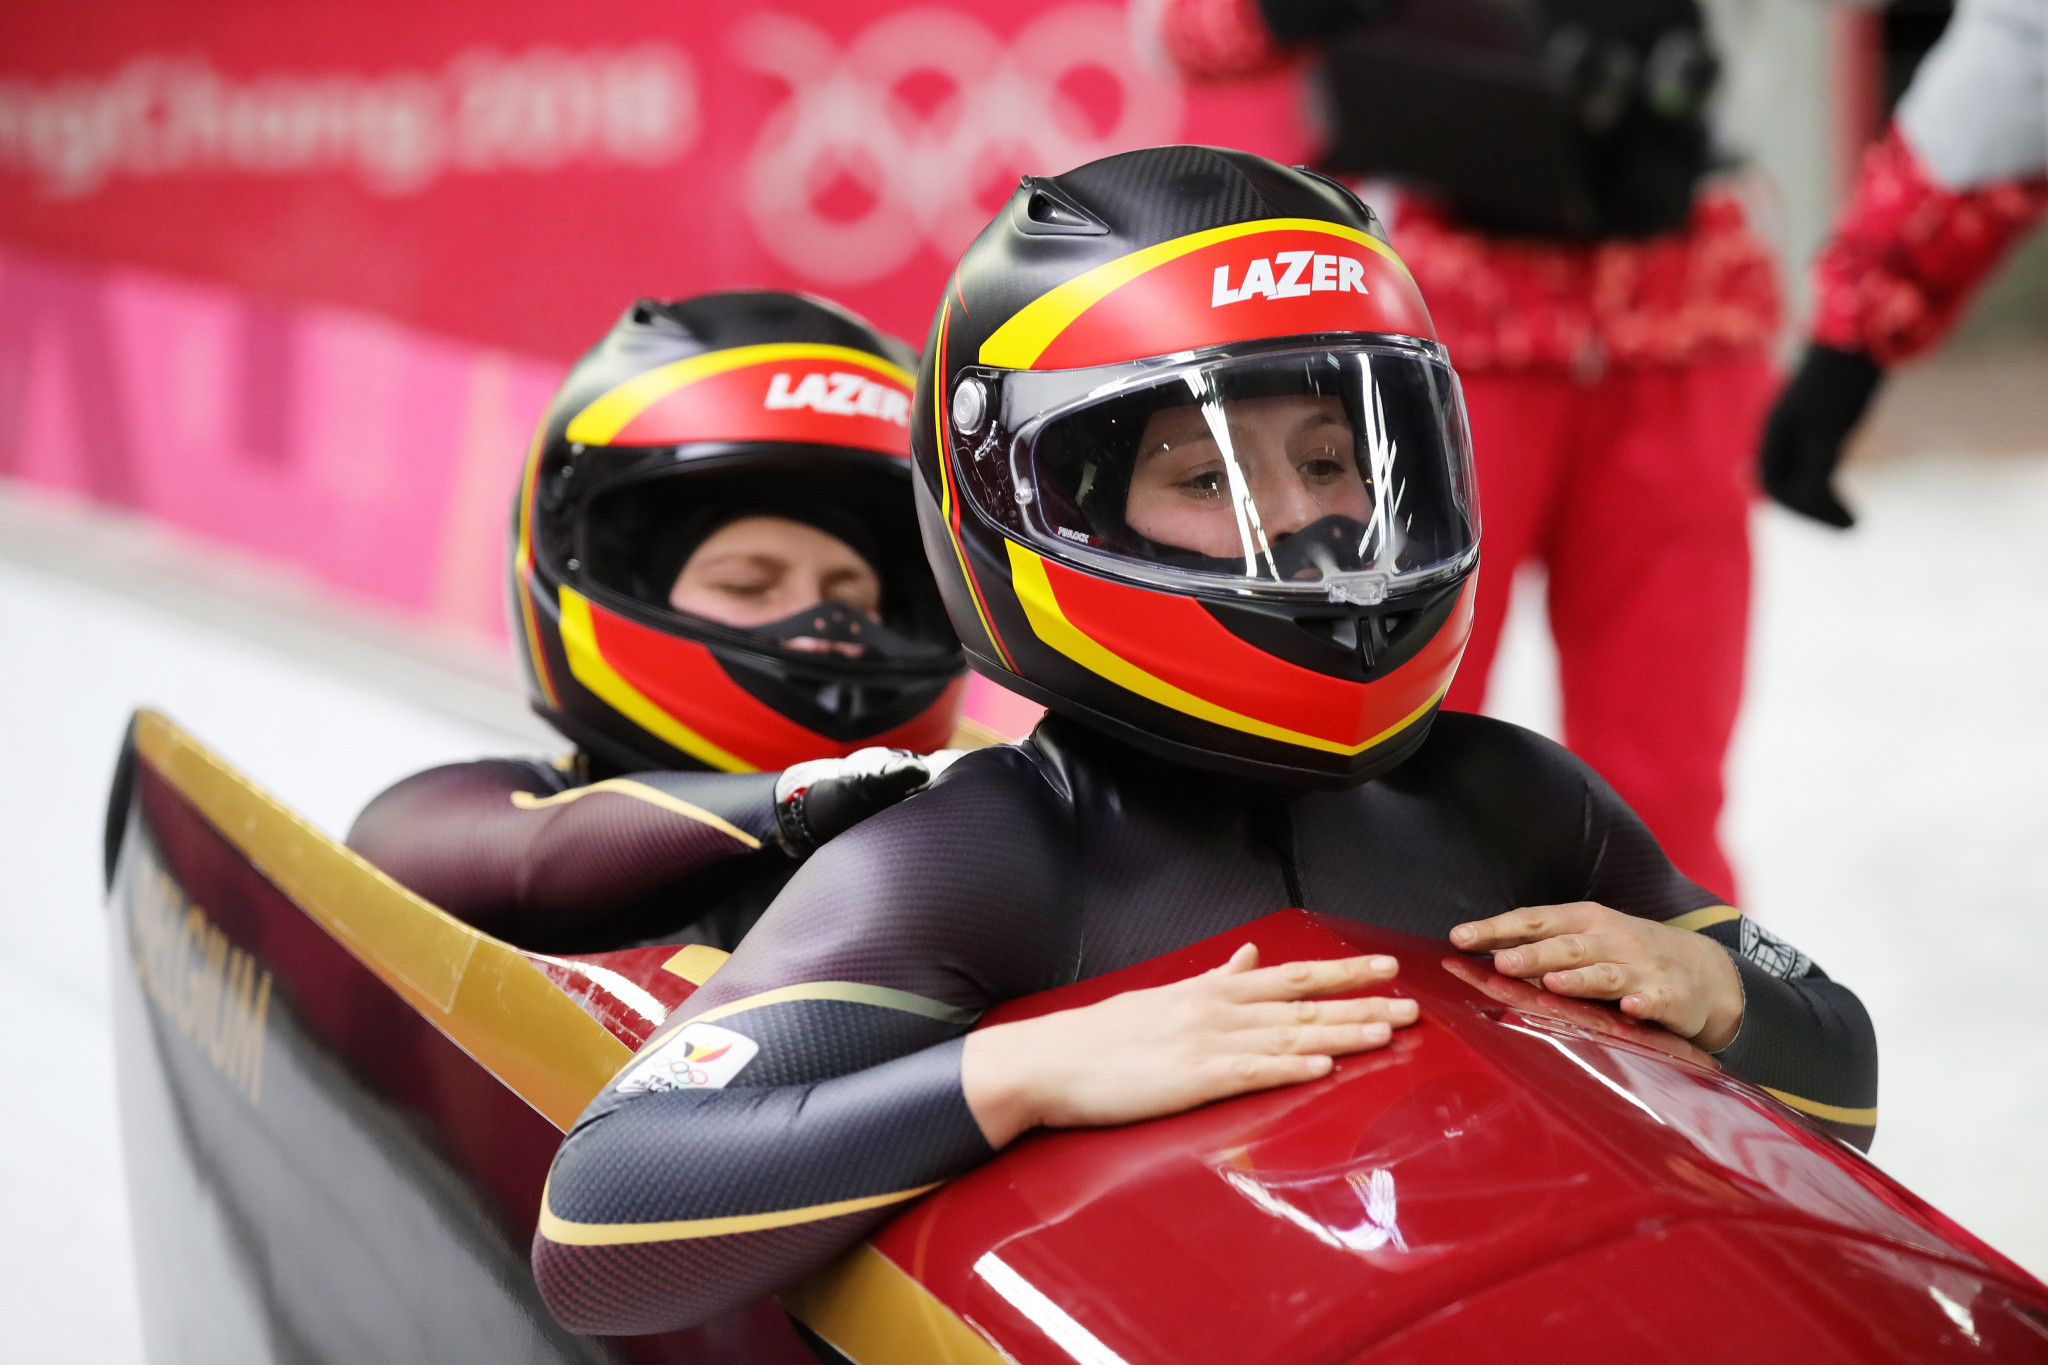 Belgium's An Vannieuwenhuyse, right, finished 12th in the two-woman bobsleigh at Pyeongchang 2018 and 12th at Beijing 2022 ©Getty Images